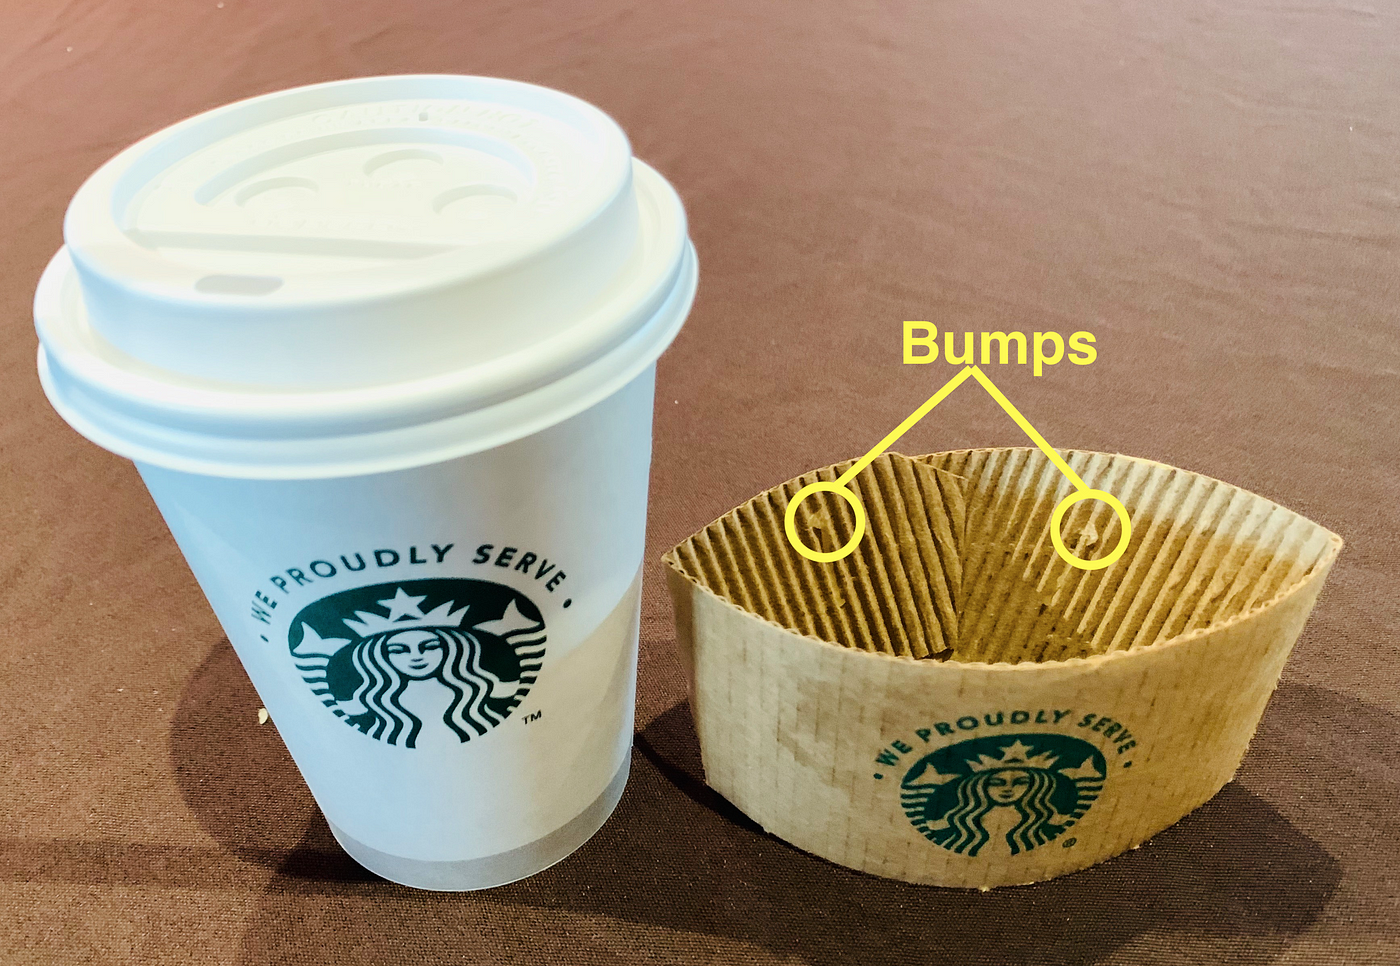 . Starbucks Coffee Cups, Sleeves and Lids